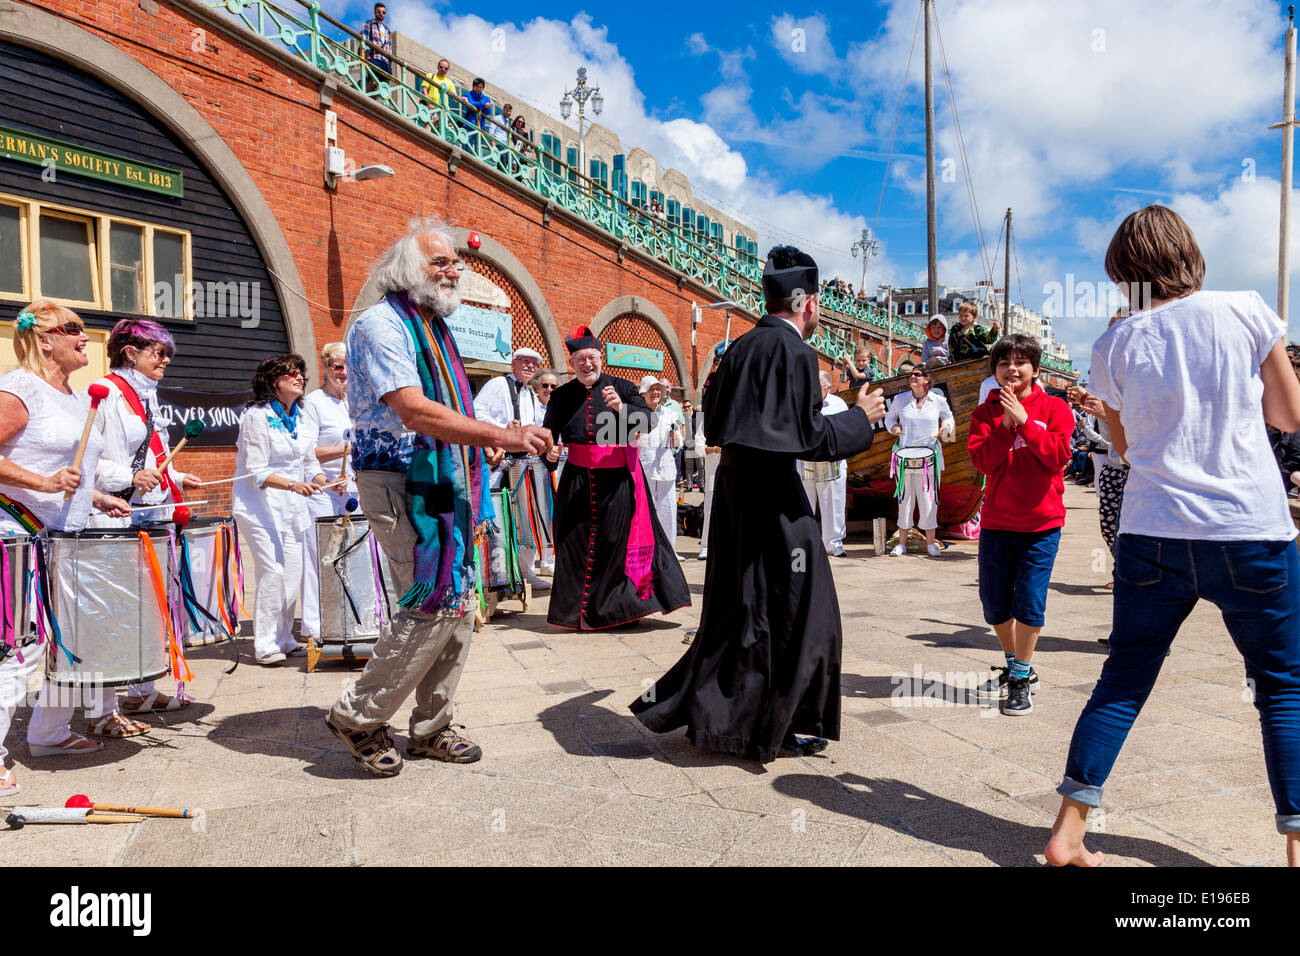 Local Parish Priests Dancing To The Silver Sounds Samba Band At The Mackerel Fayre, Brighton Seafront, Sussex, England Stock Photo